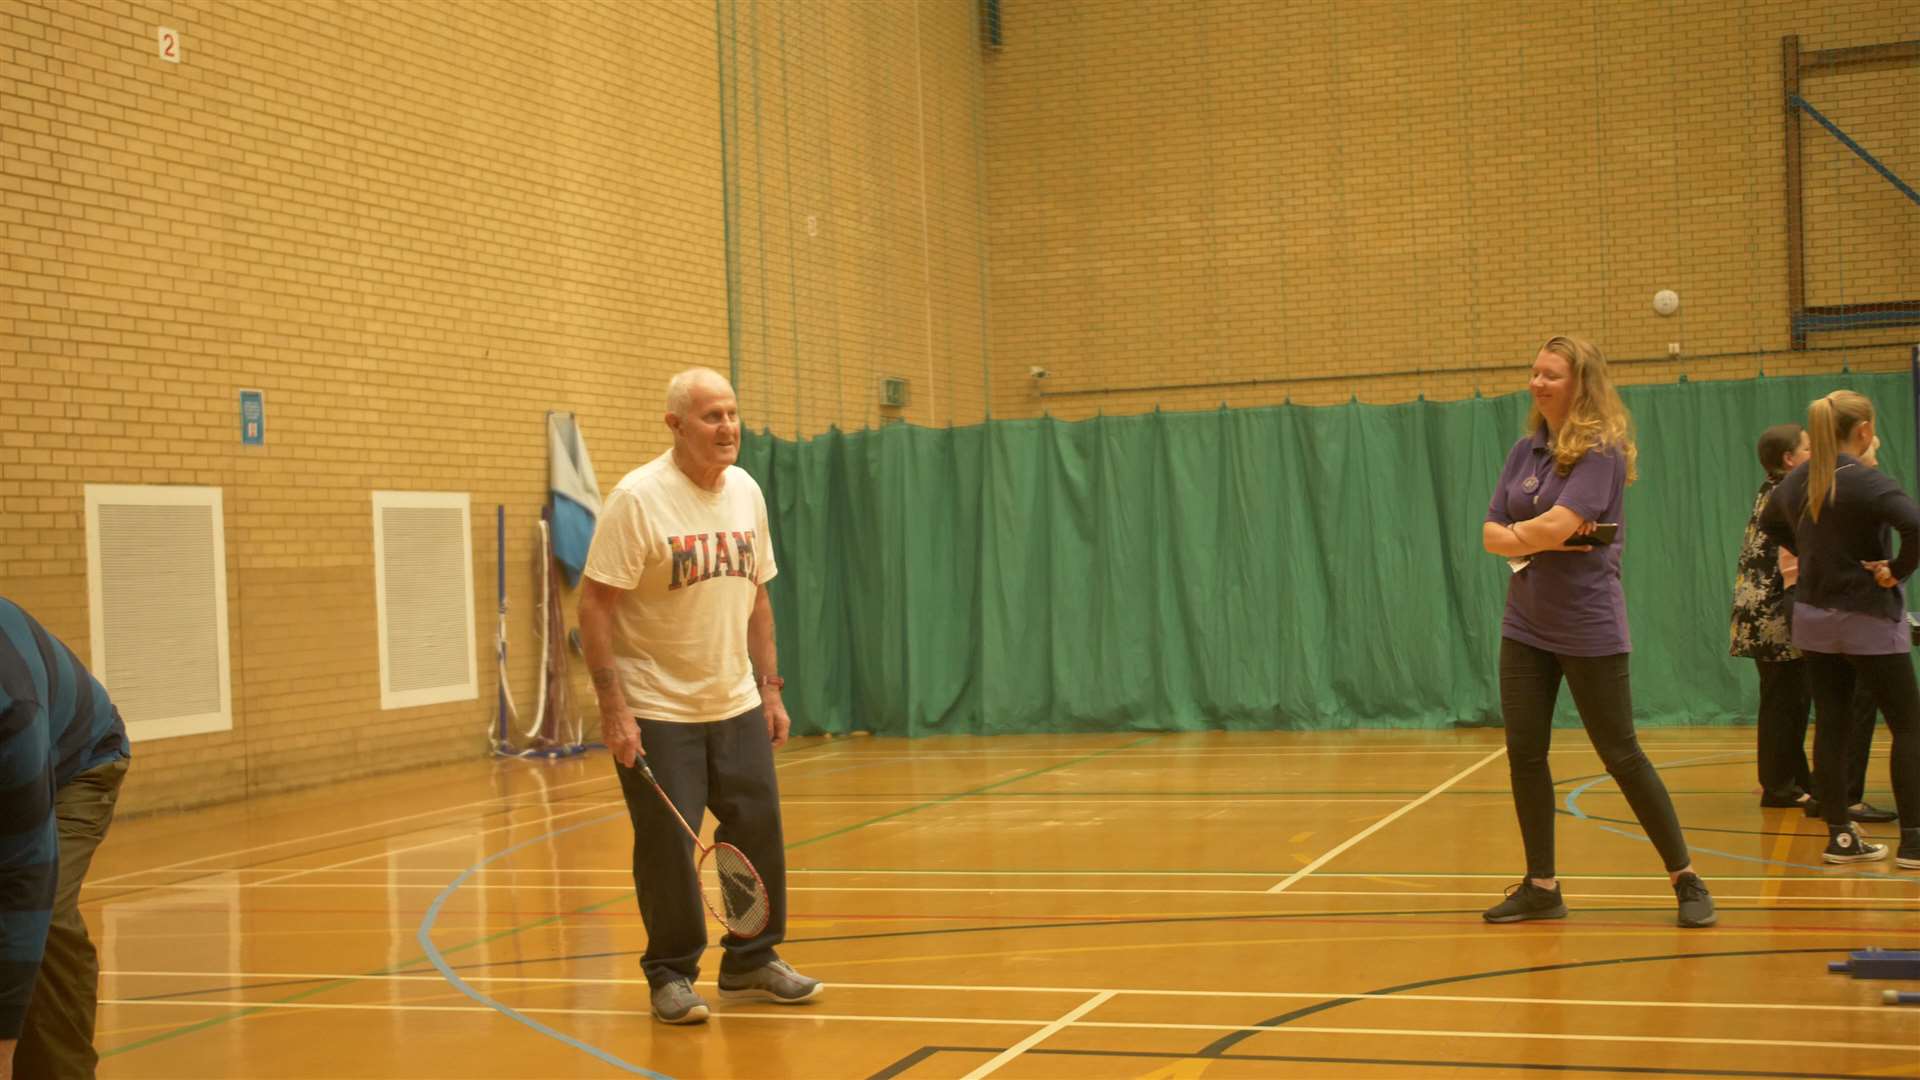 The group playing badminton